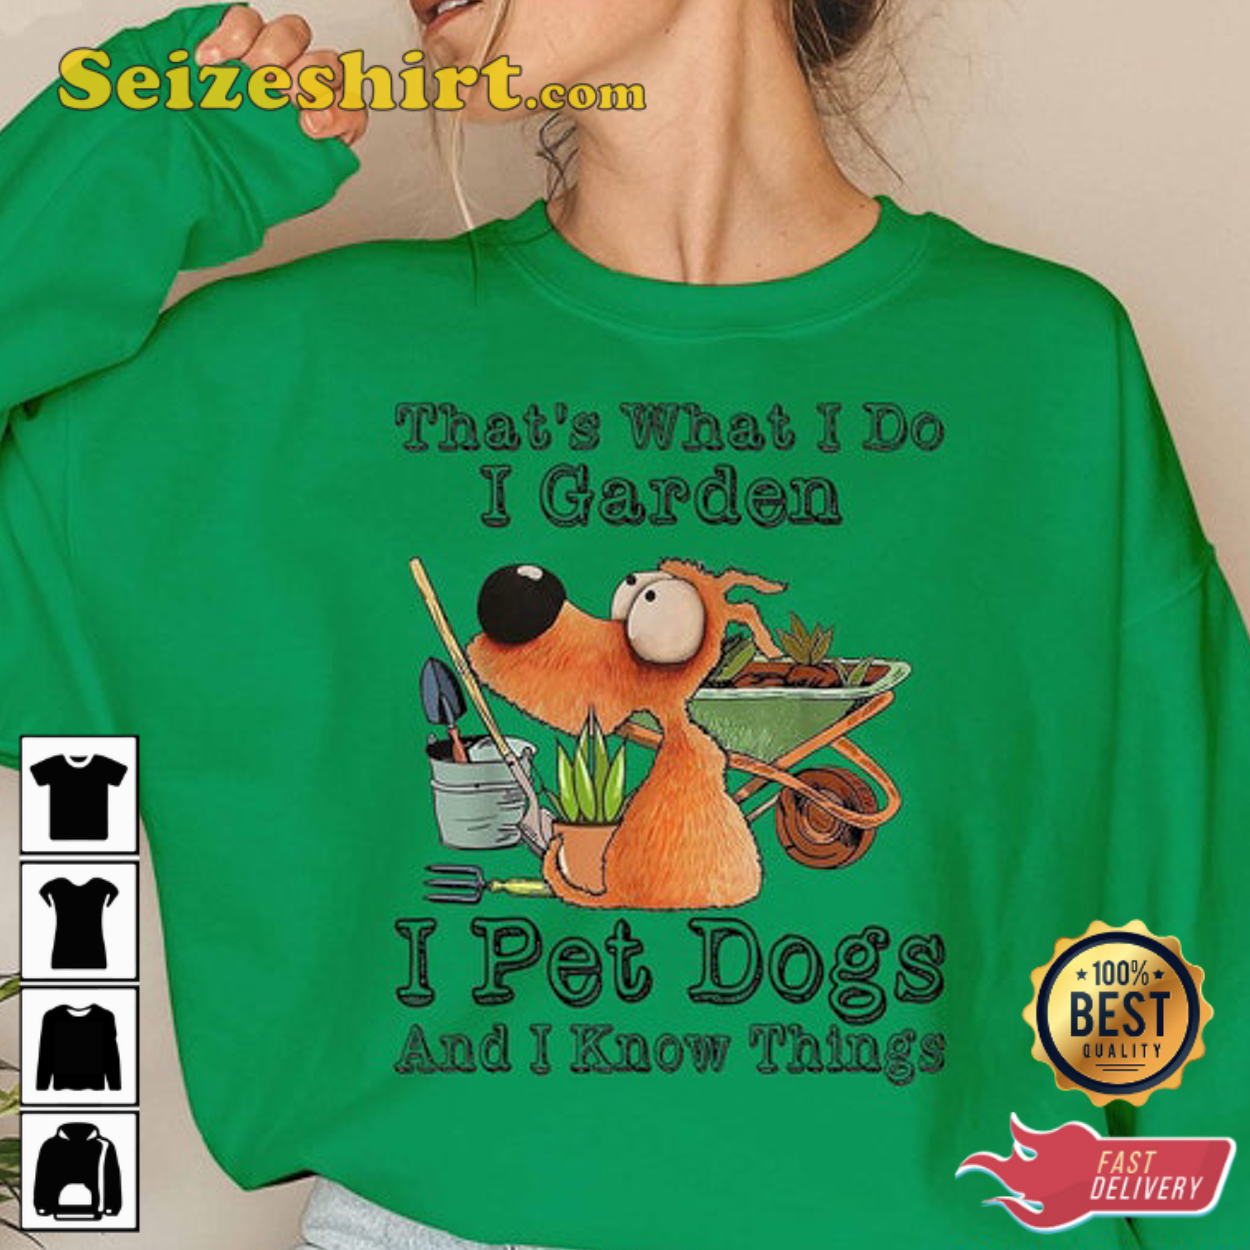 Thats What I Do I Garden I Pet Dogs And I Know Things, Read Books I Know Things Shirt, Dog Reading, Book Lover Shirt